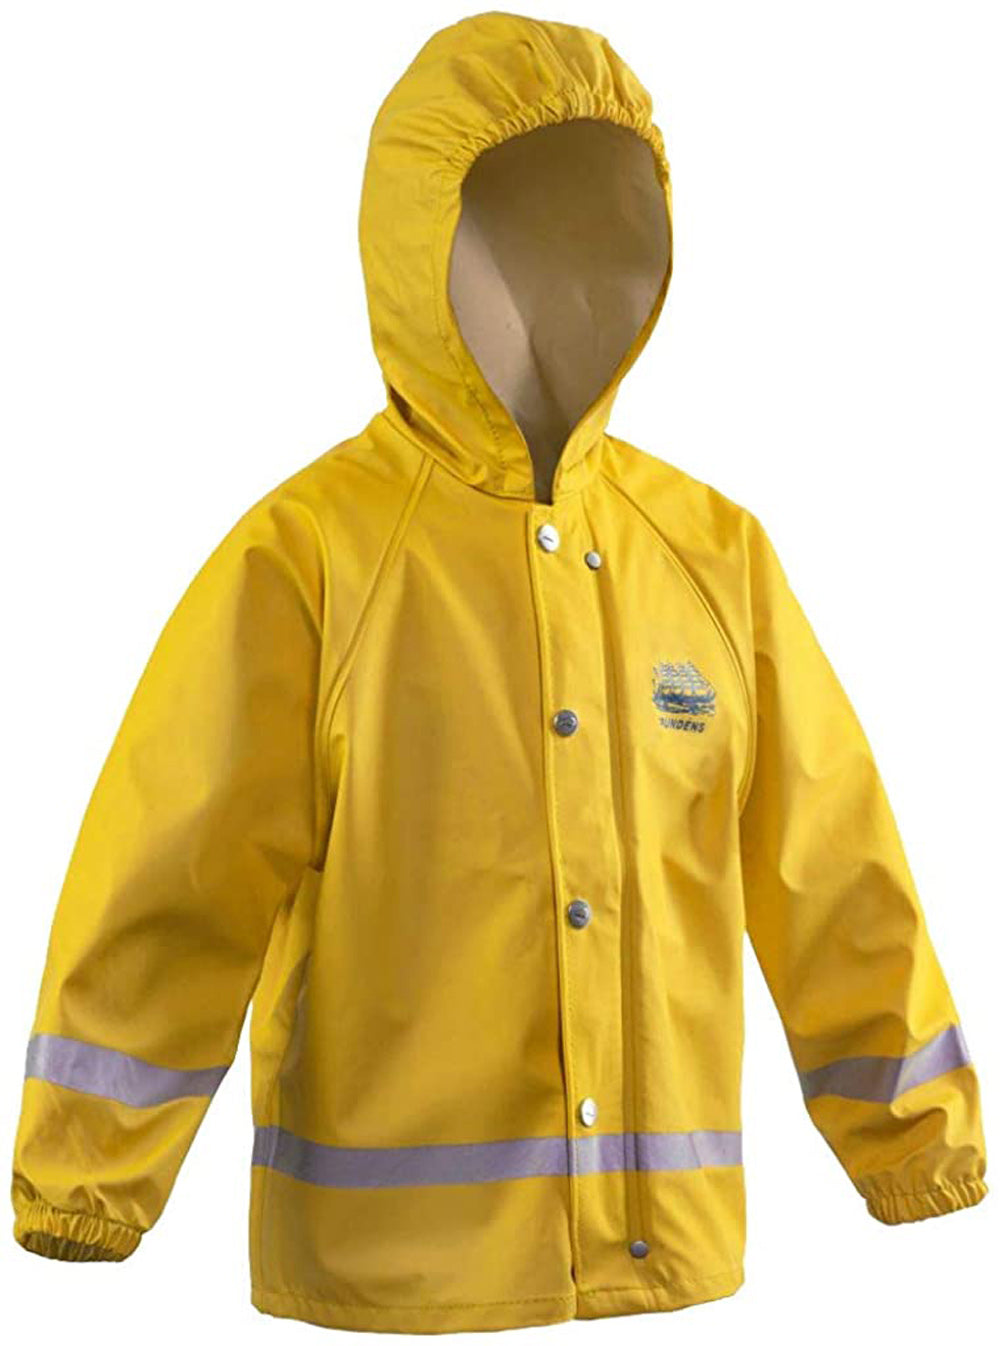 Zenith 293 Jacket in Yellow color from the front view